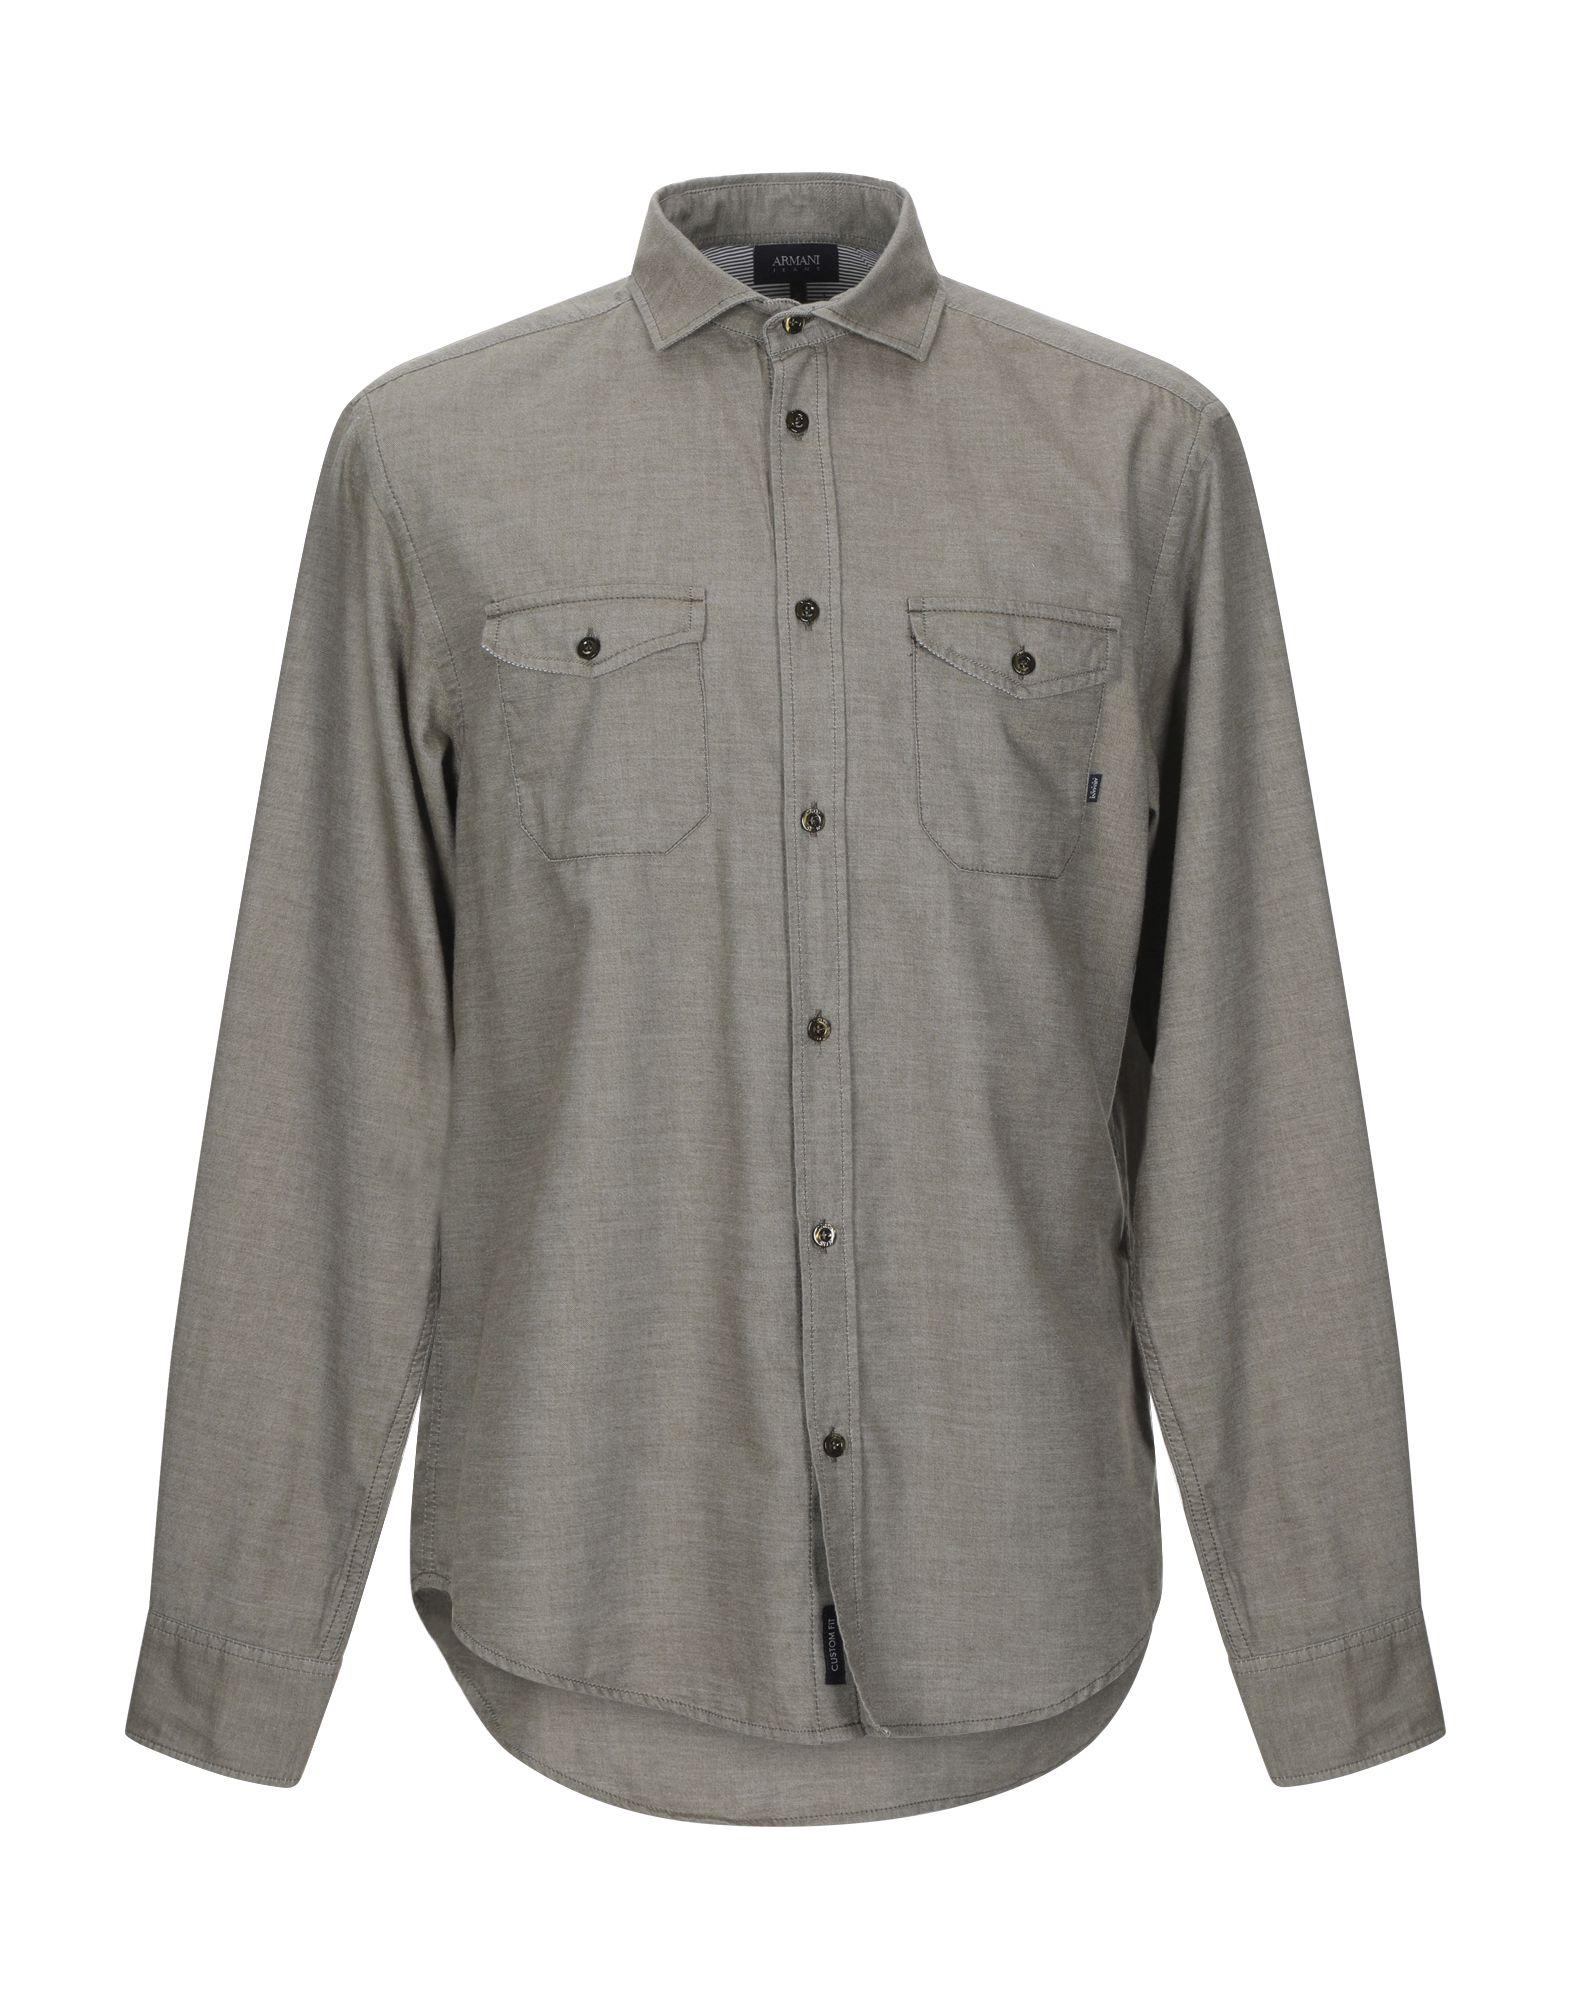 Armani Jeans Flannel Shirt in Military Green (Gray) for Men - Lyst